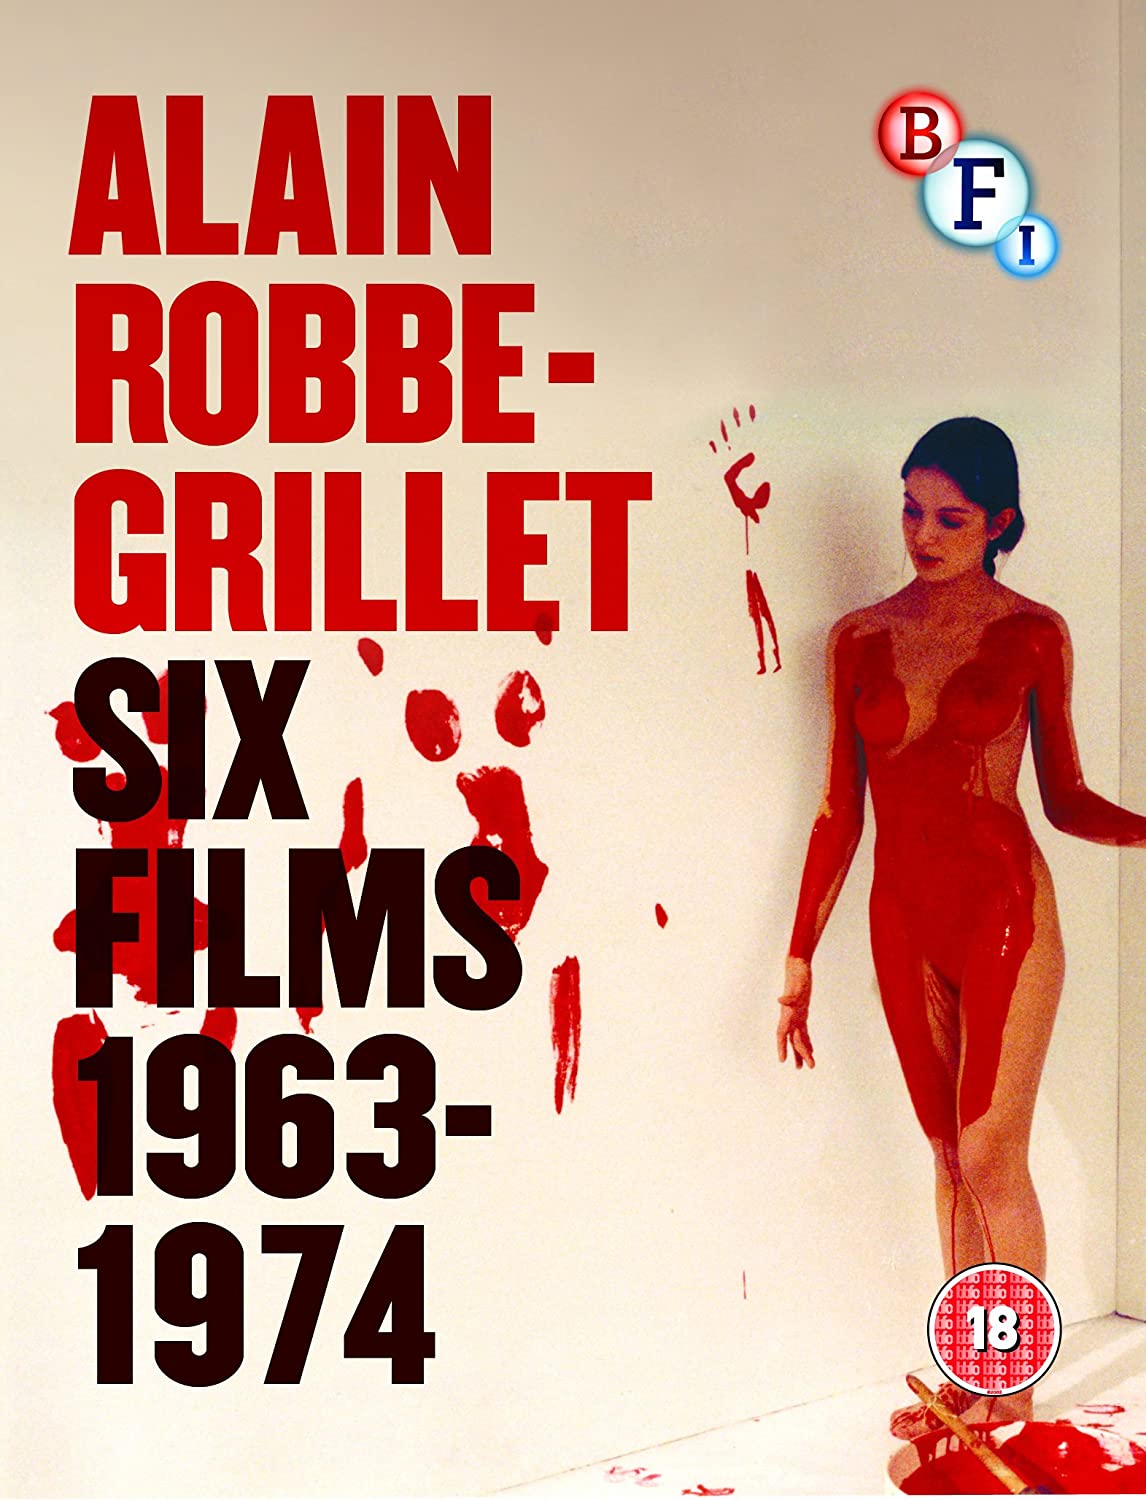 Alain Robbe-Grillet: Six Films 1963 -1974 - Blu-ray Disc Box Set | Alain Robbe-Grillet